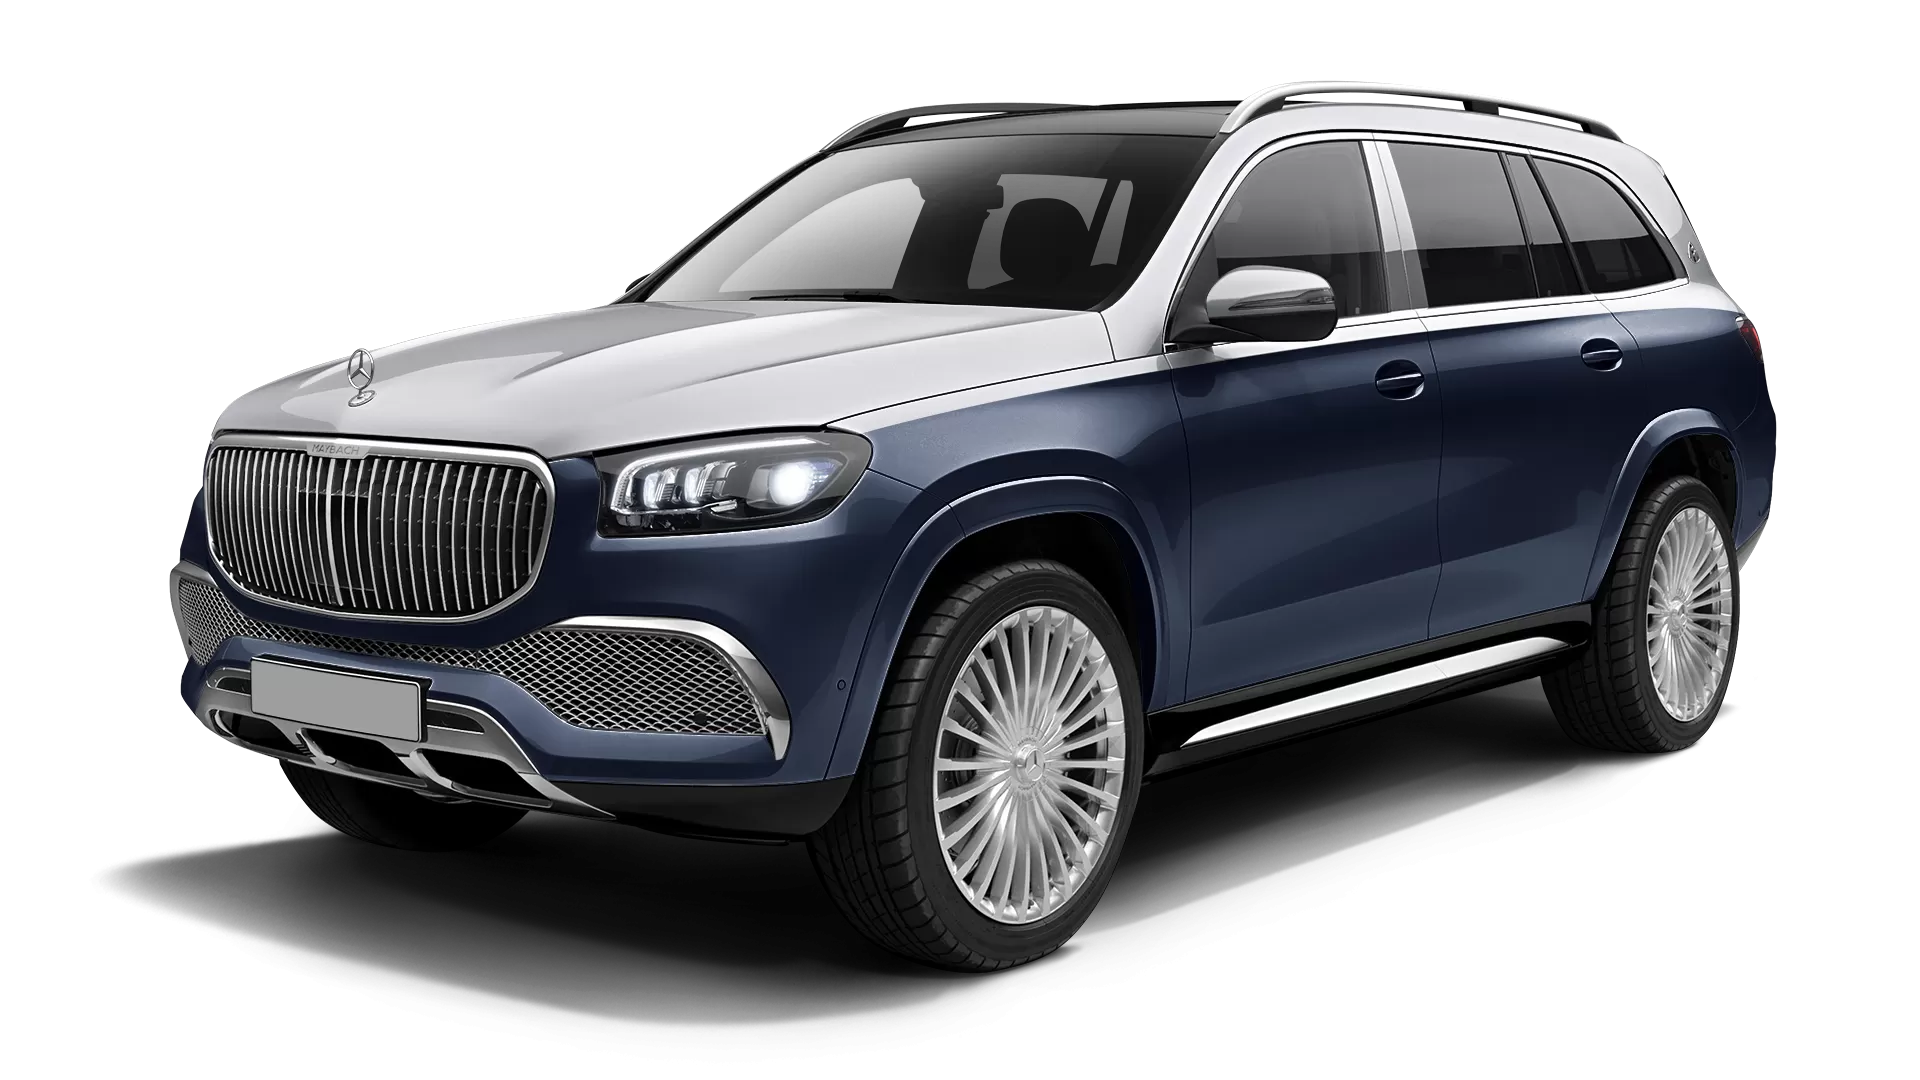 Mercedes Maybach GLS 600 stock front view in Cavansite Blue & Iridium Silver color